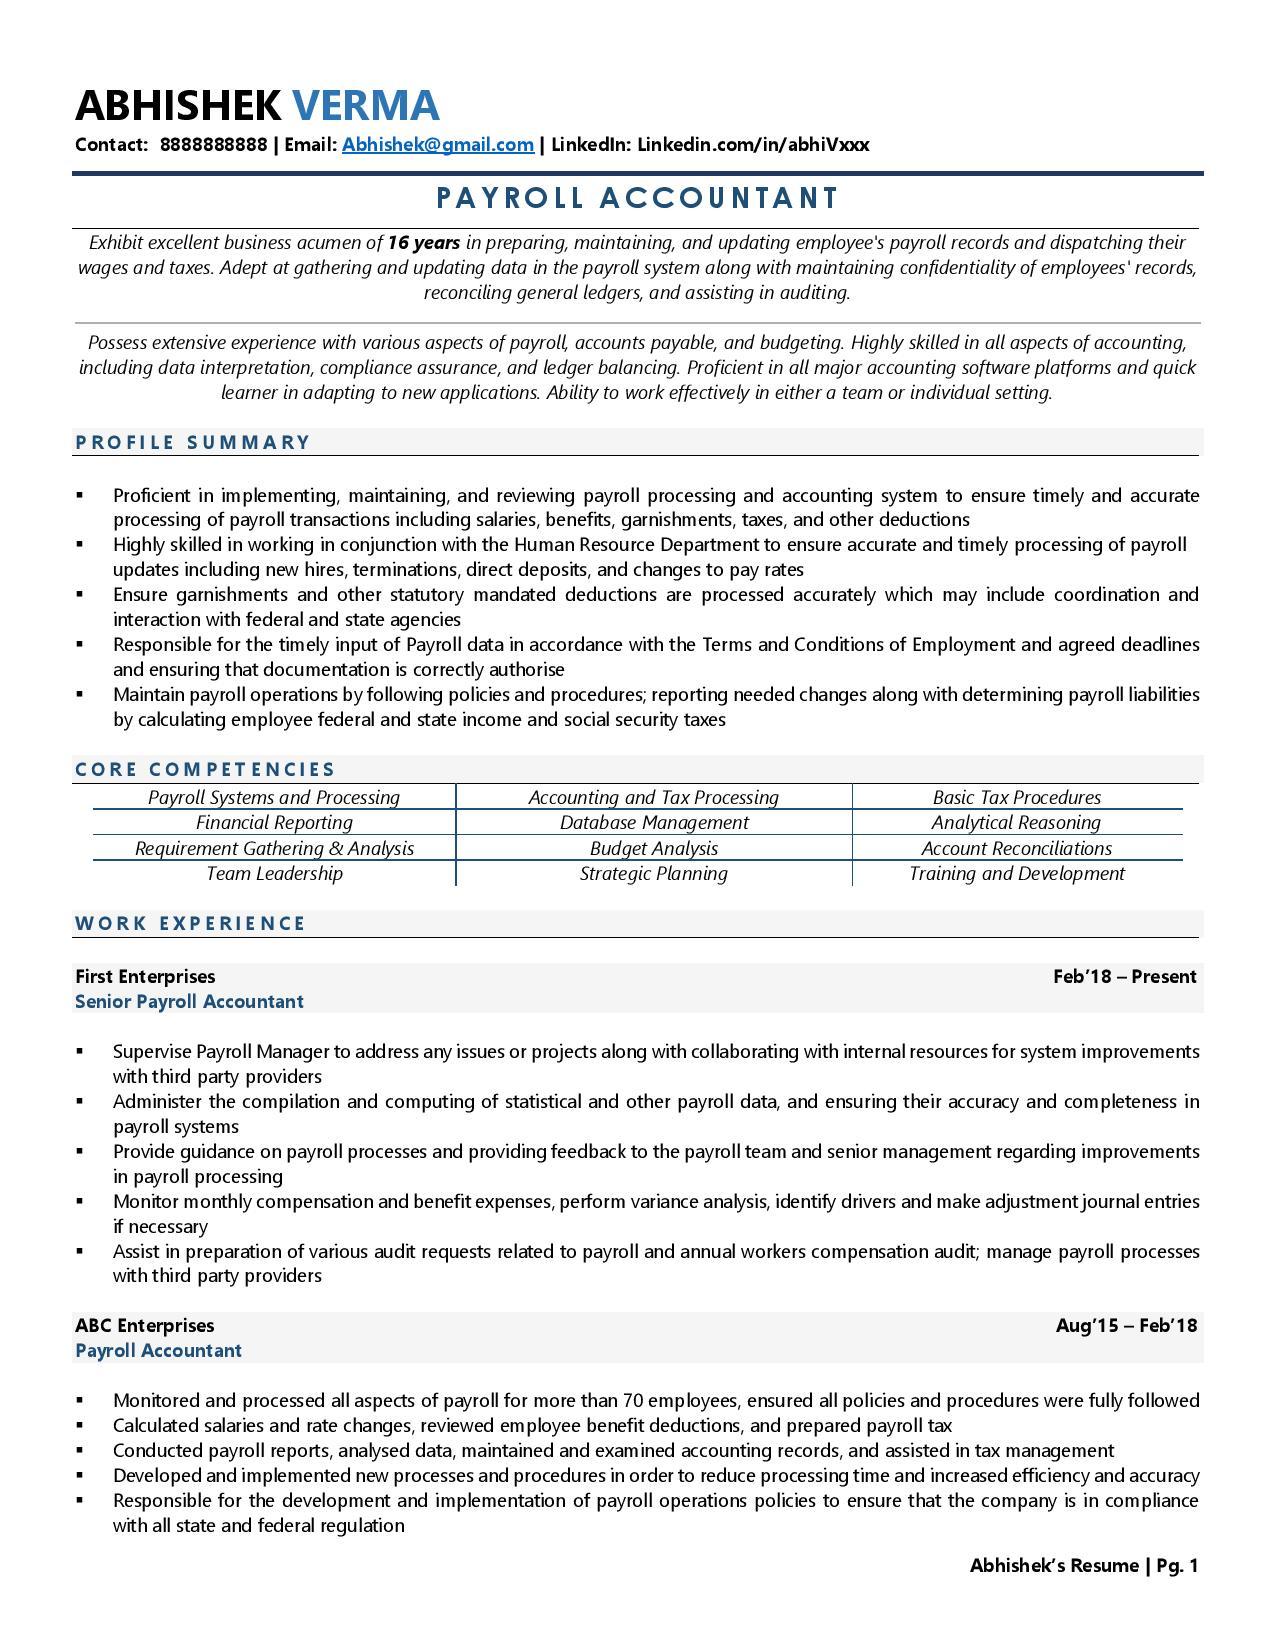 resumes for payroll jobs